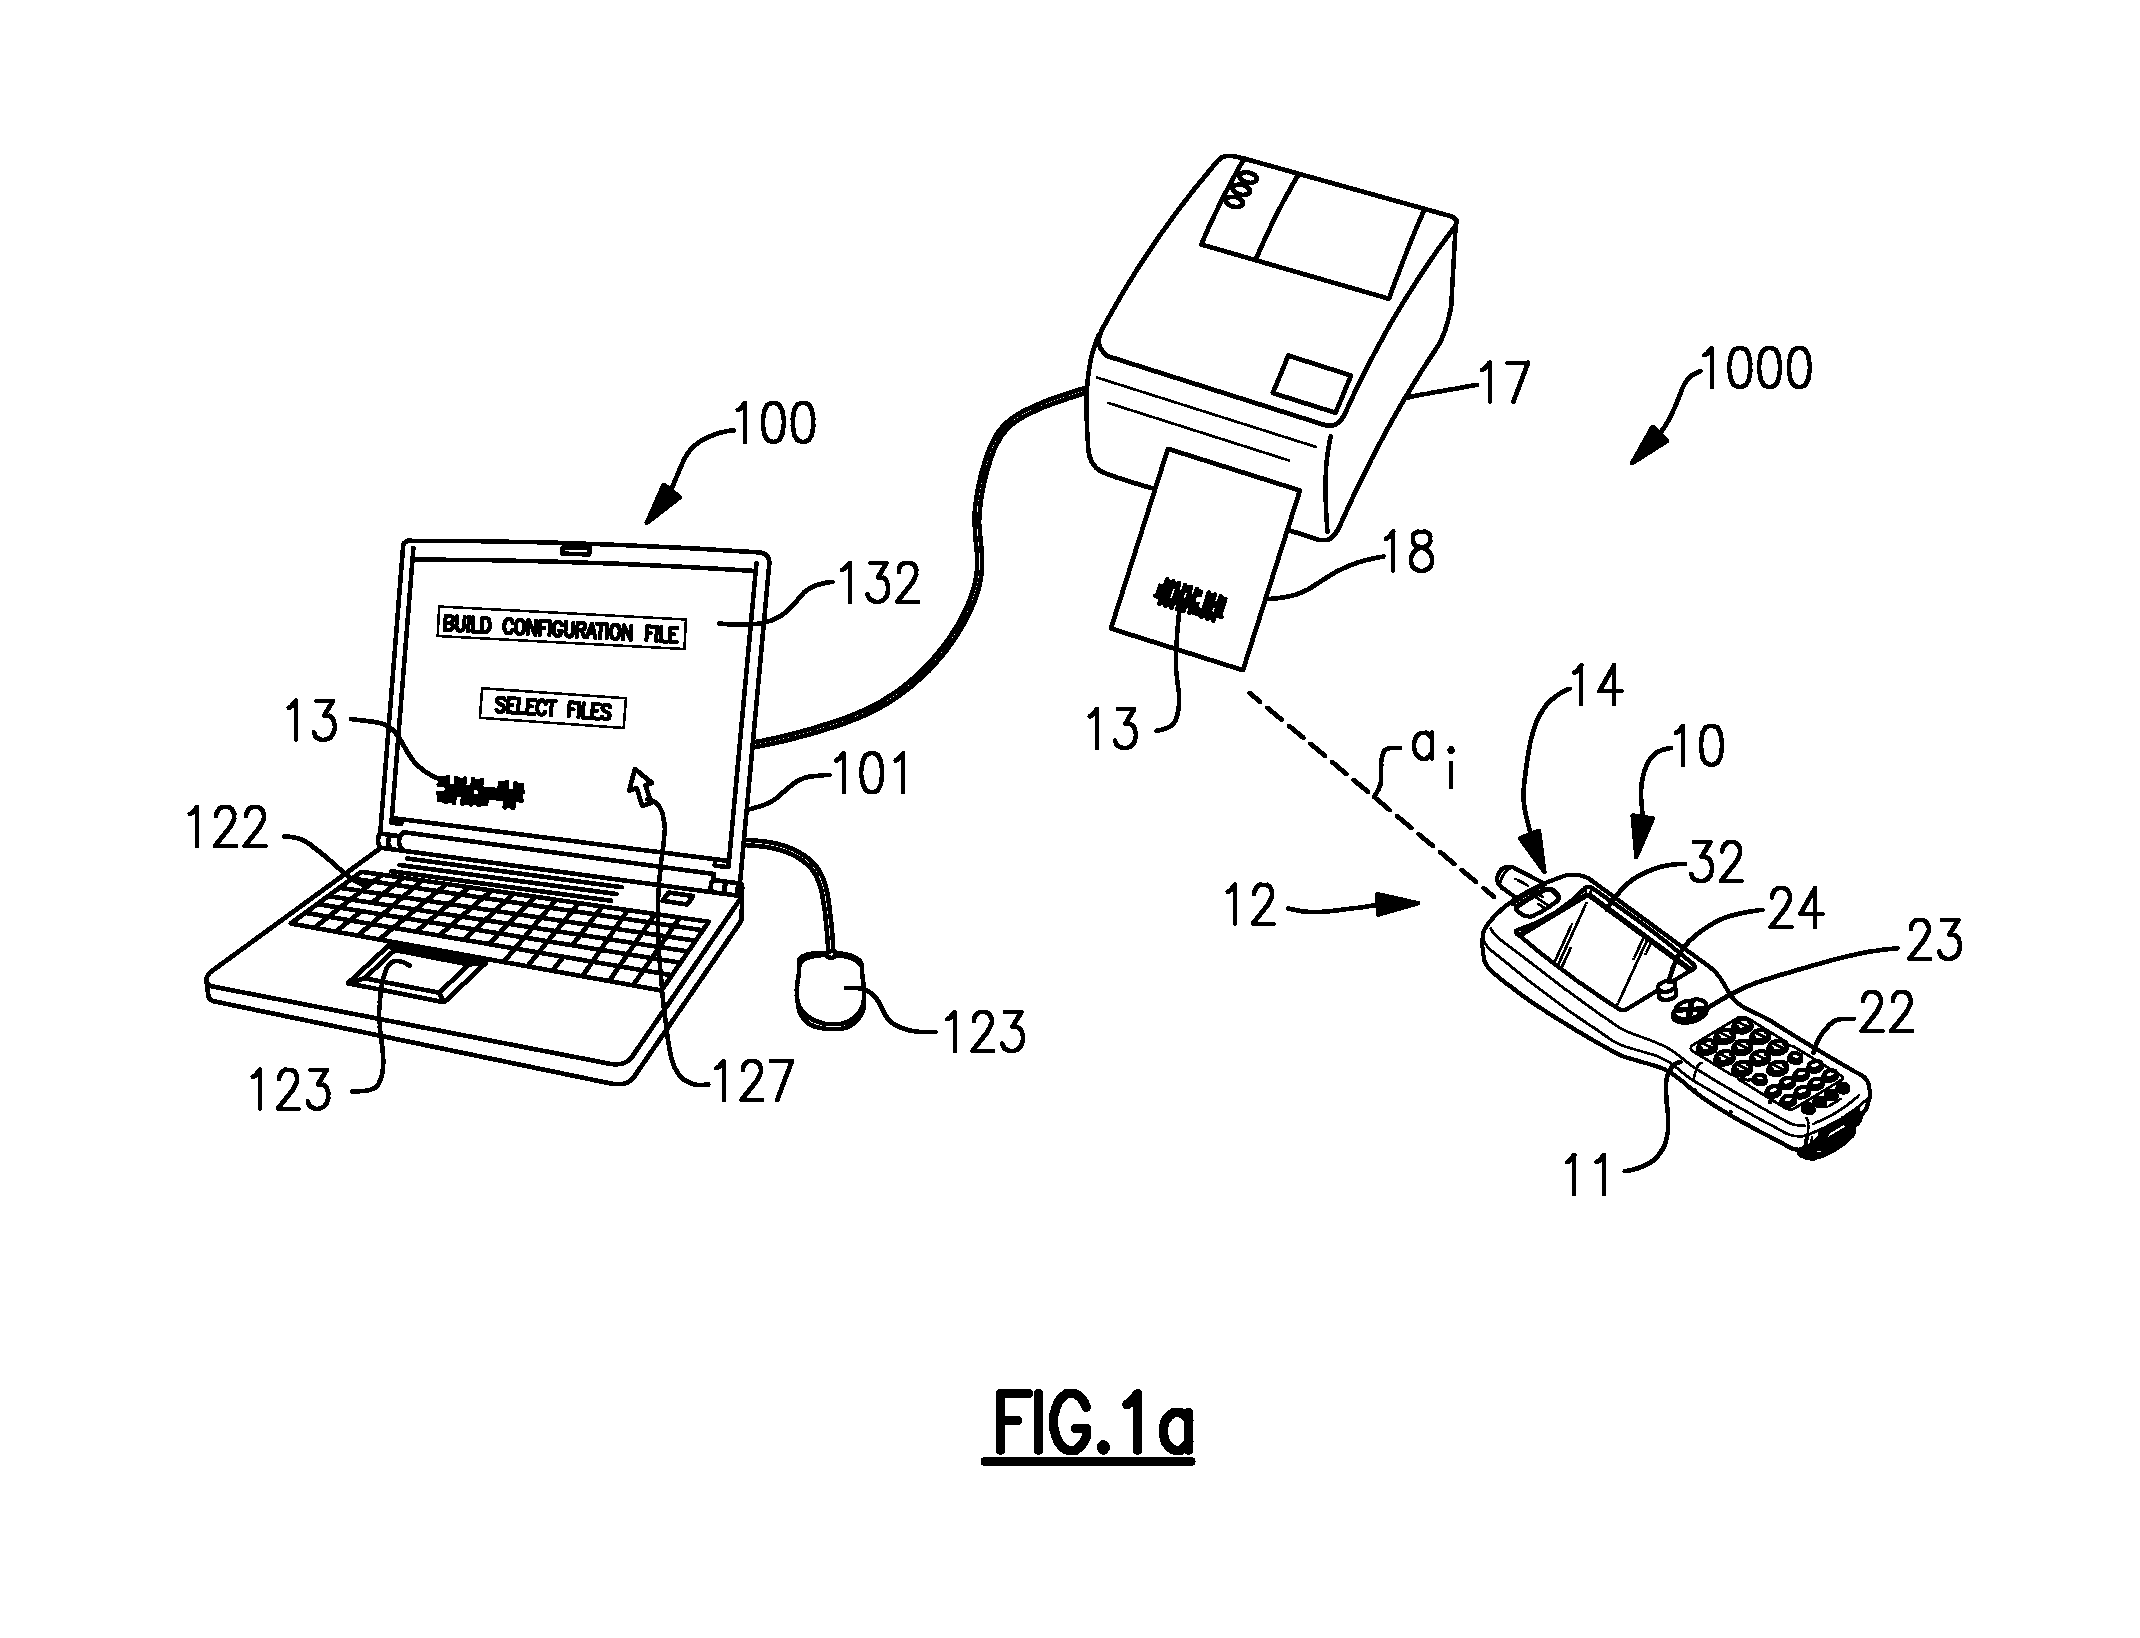 Data collection system having reconfigurable data collection terminal